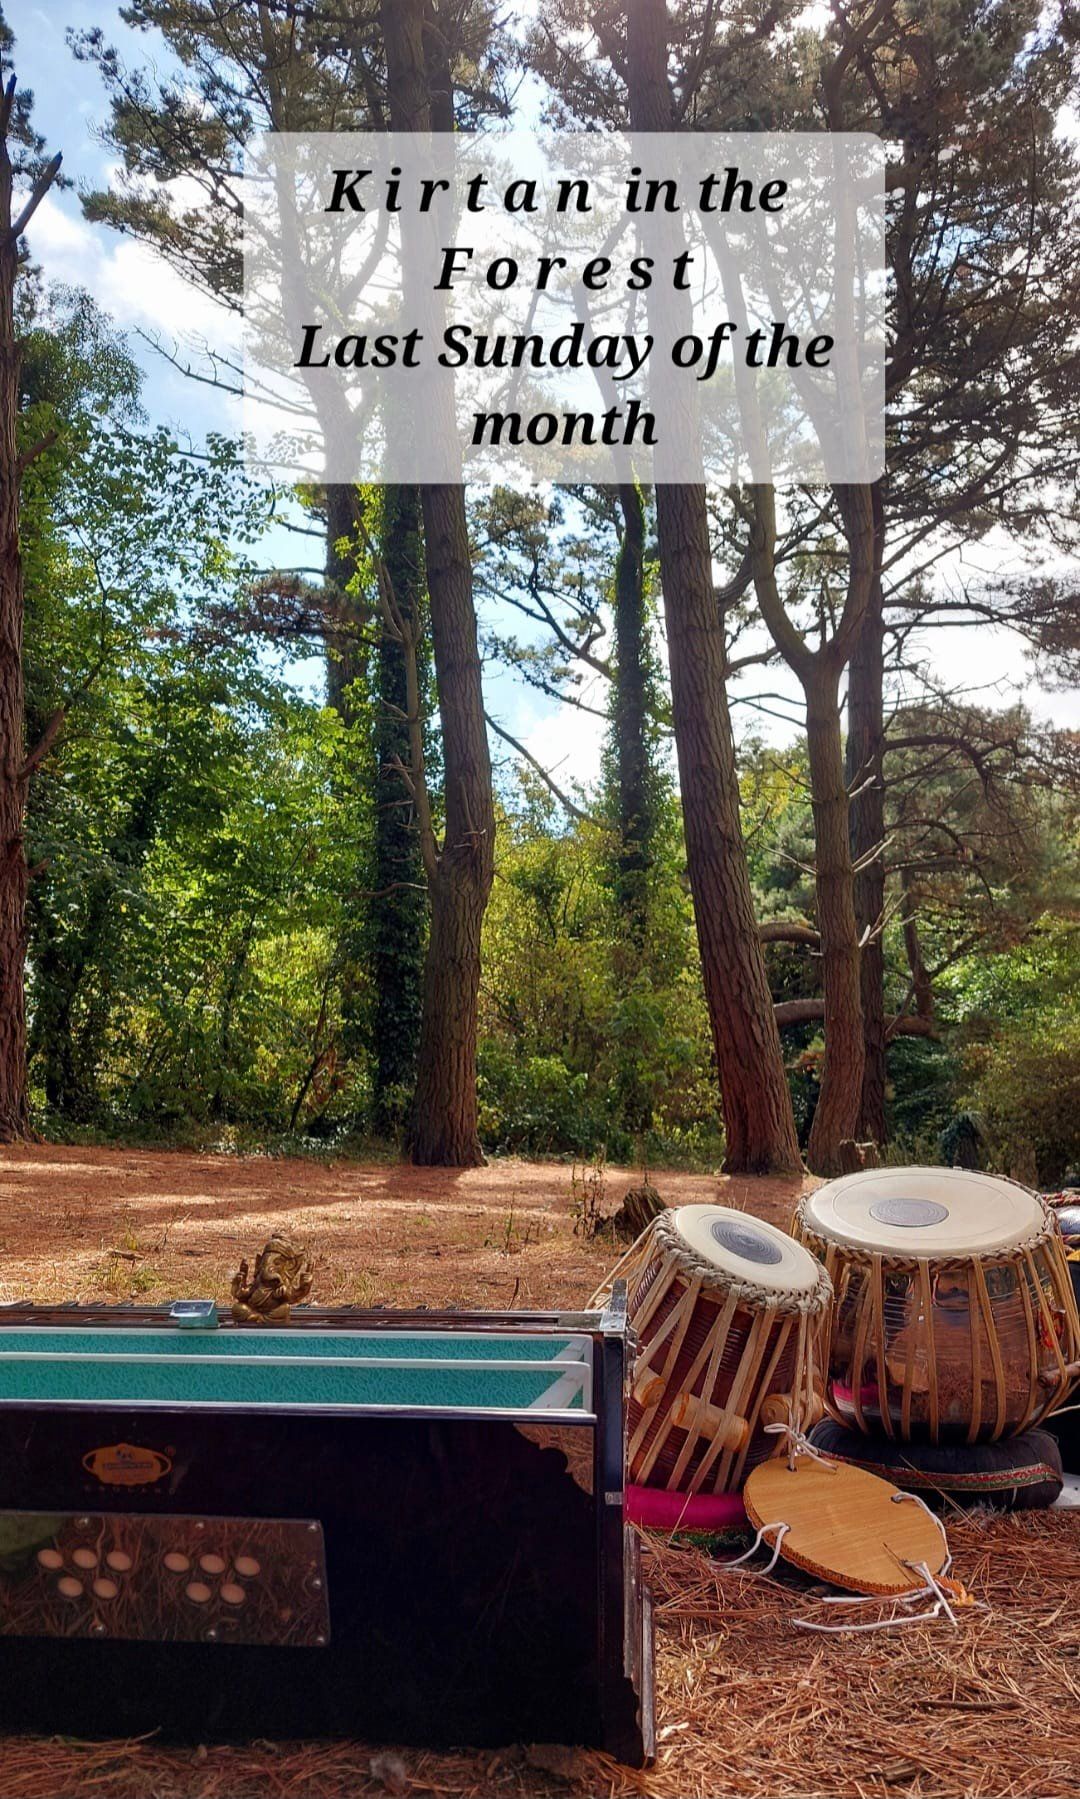 Kirtan & Heartsong in the Forest